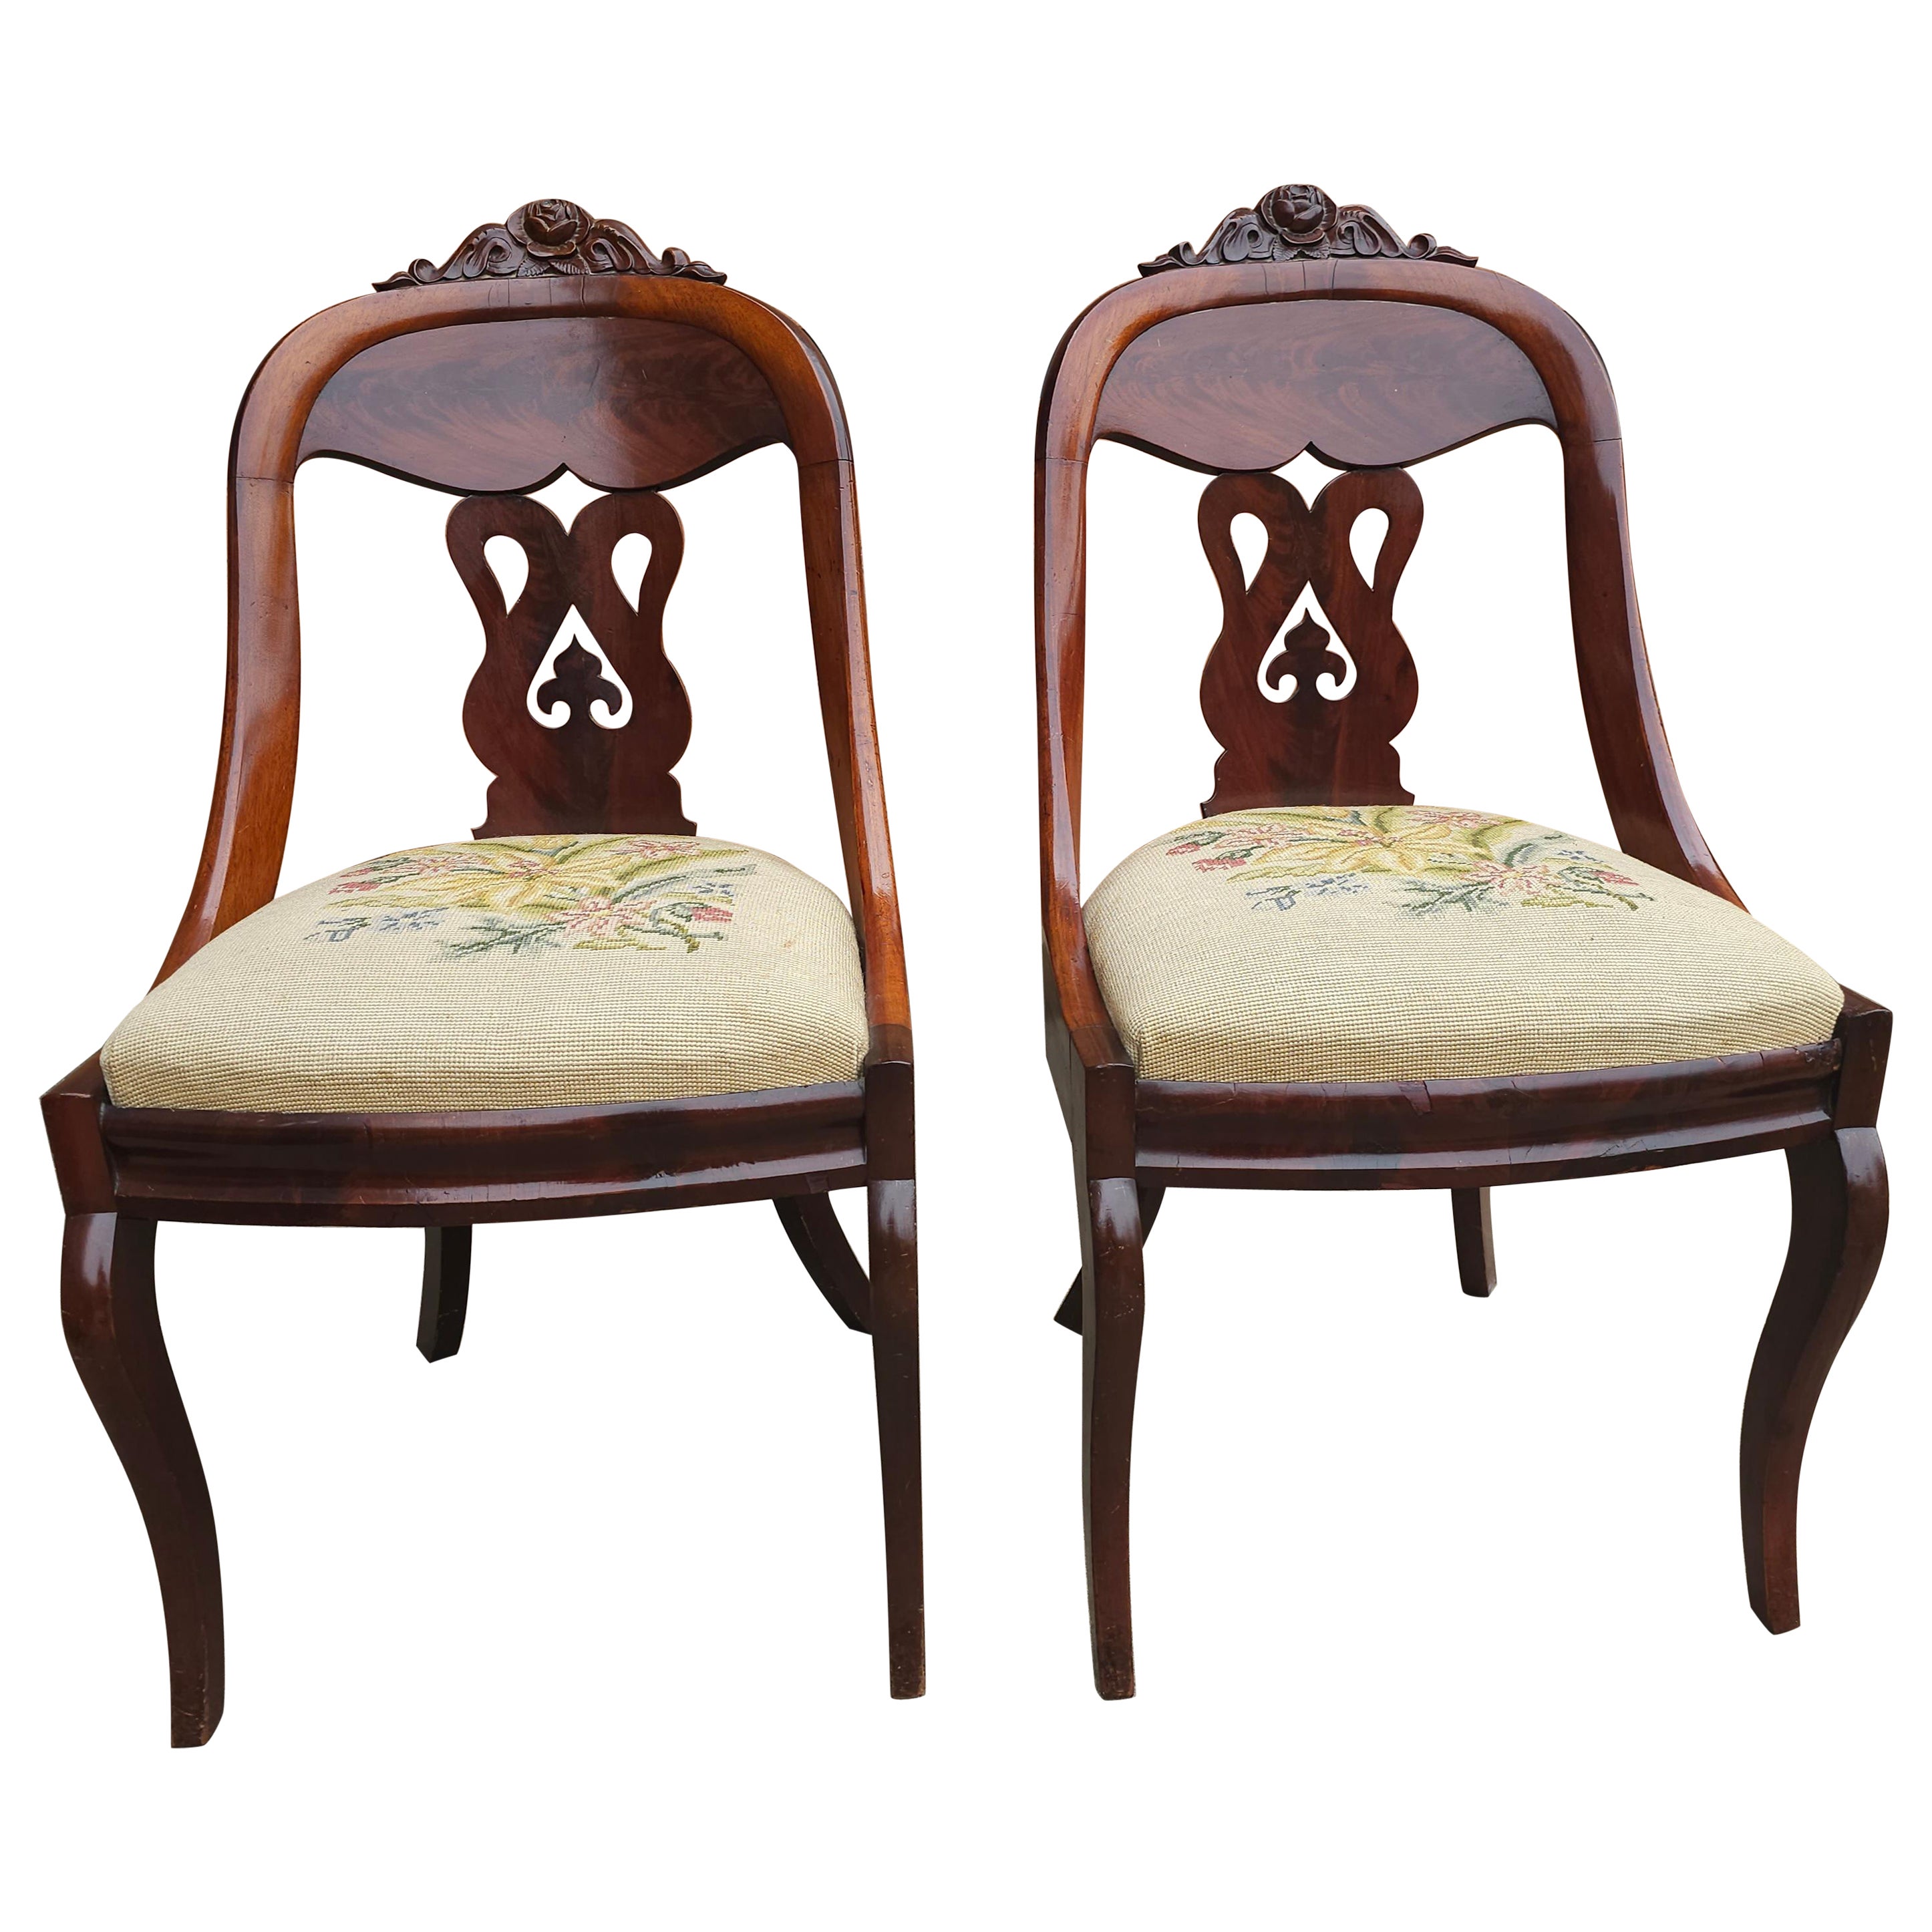 Pair 19th C. American Empire Carved Magogany and Upholstered Chairs For Sale